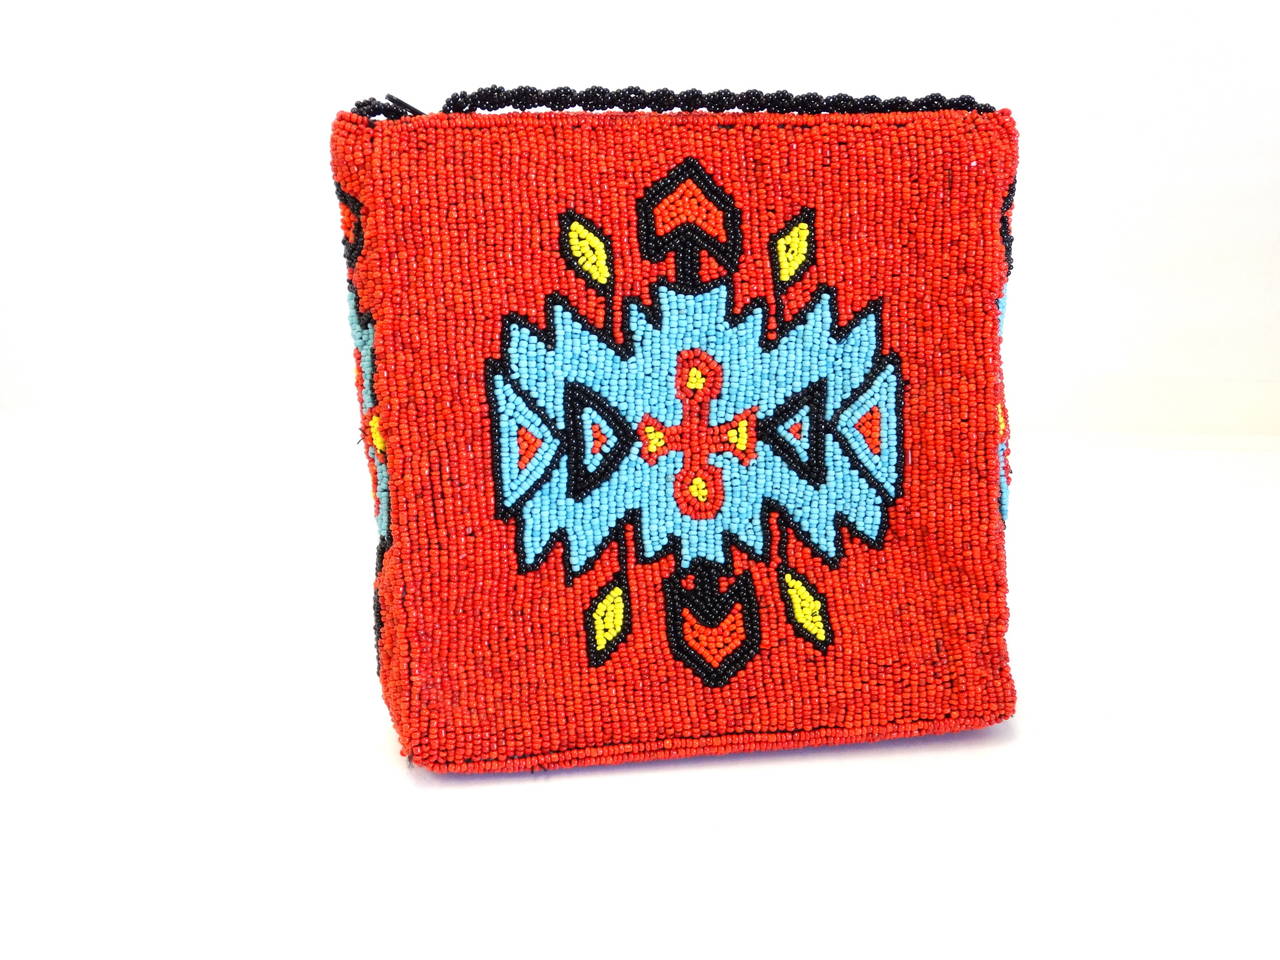 What an exquisite Gammon Shire 1993 beaded southwest motif shoulder bag, great beaded detail on every panel, this beauty has a design even the bottom!
The color palette is of the true southwest! Red, Black, Yellow and Turquoise beads cover this